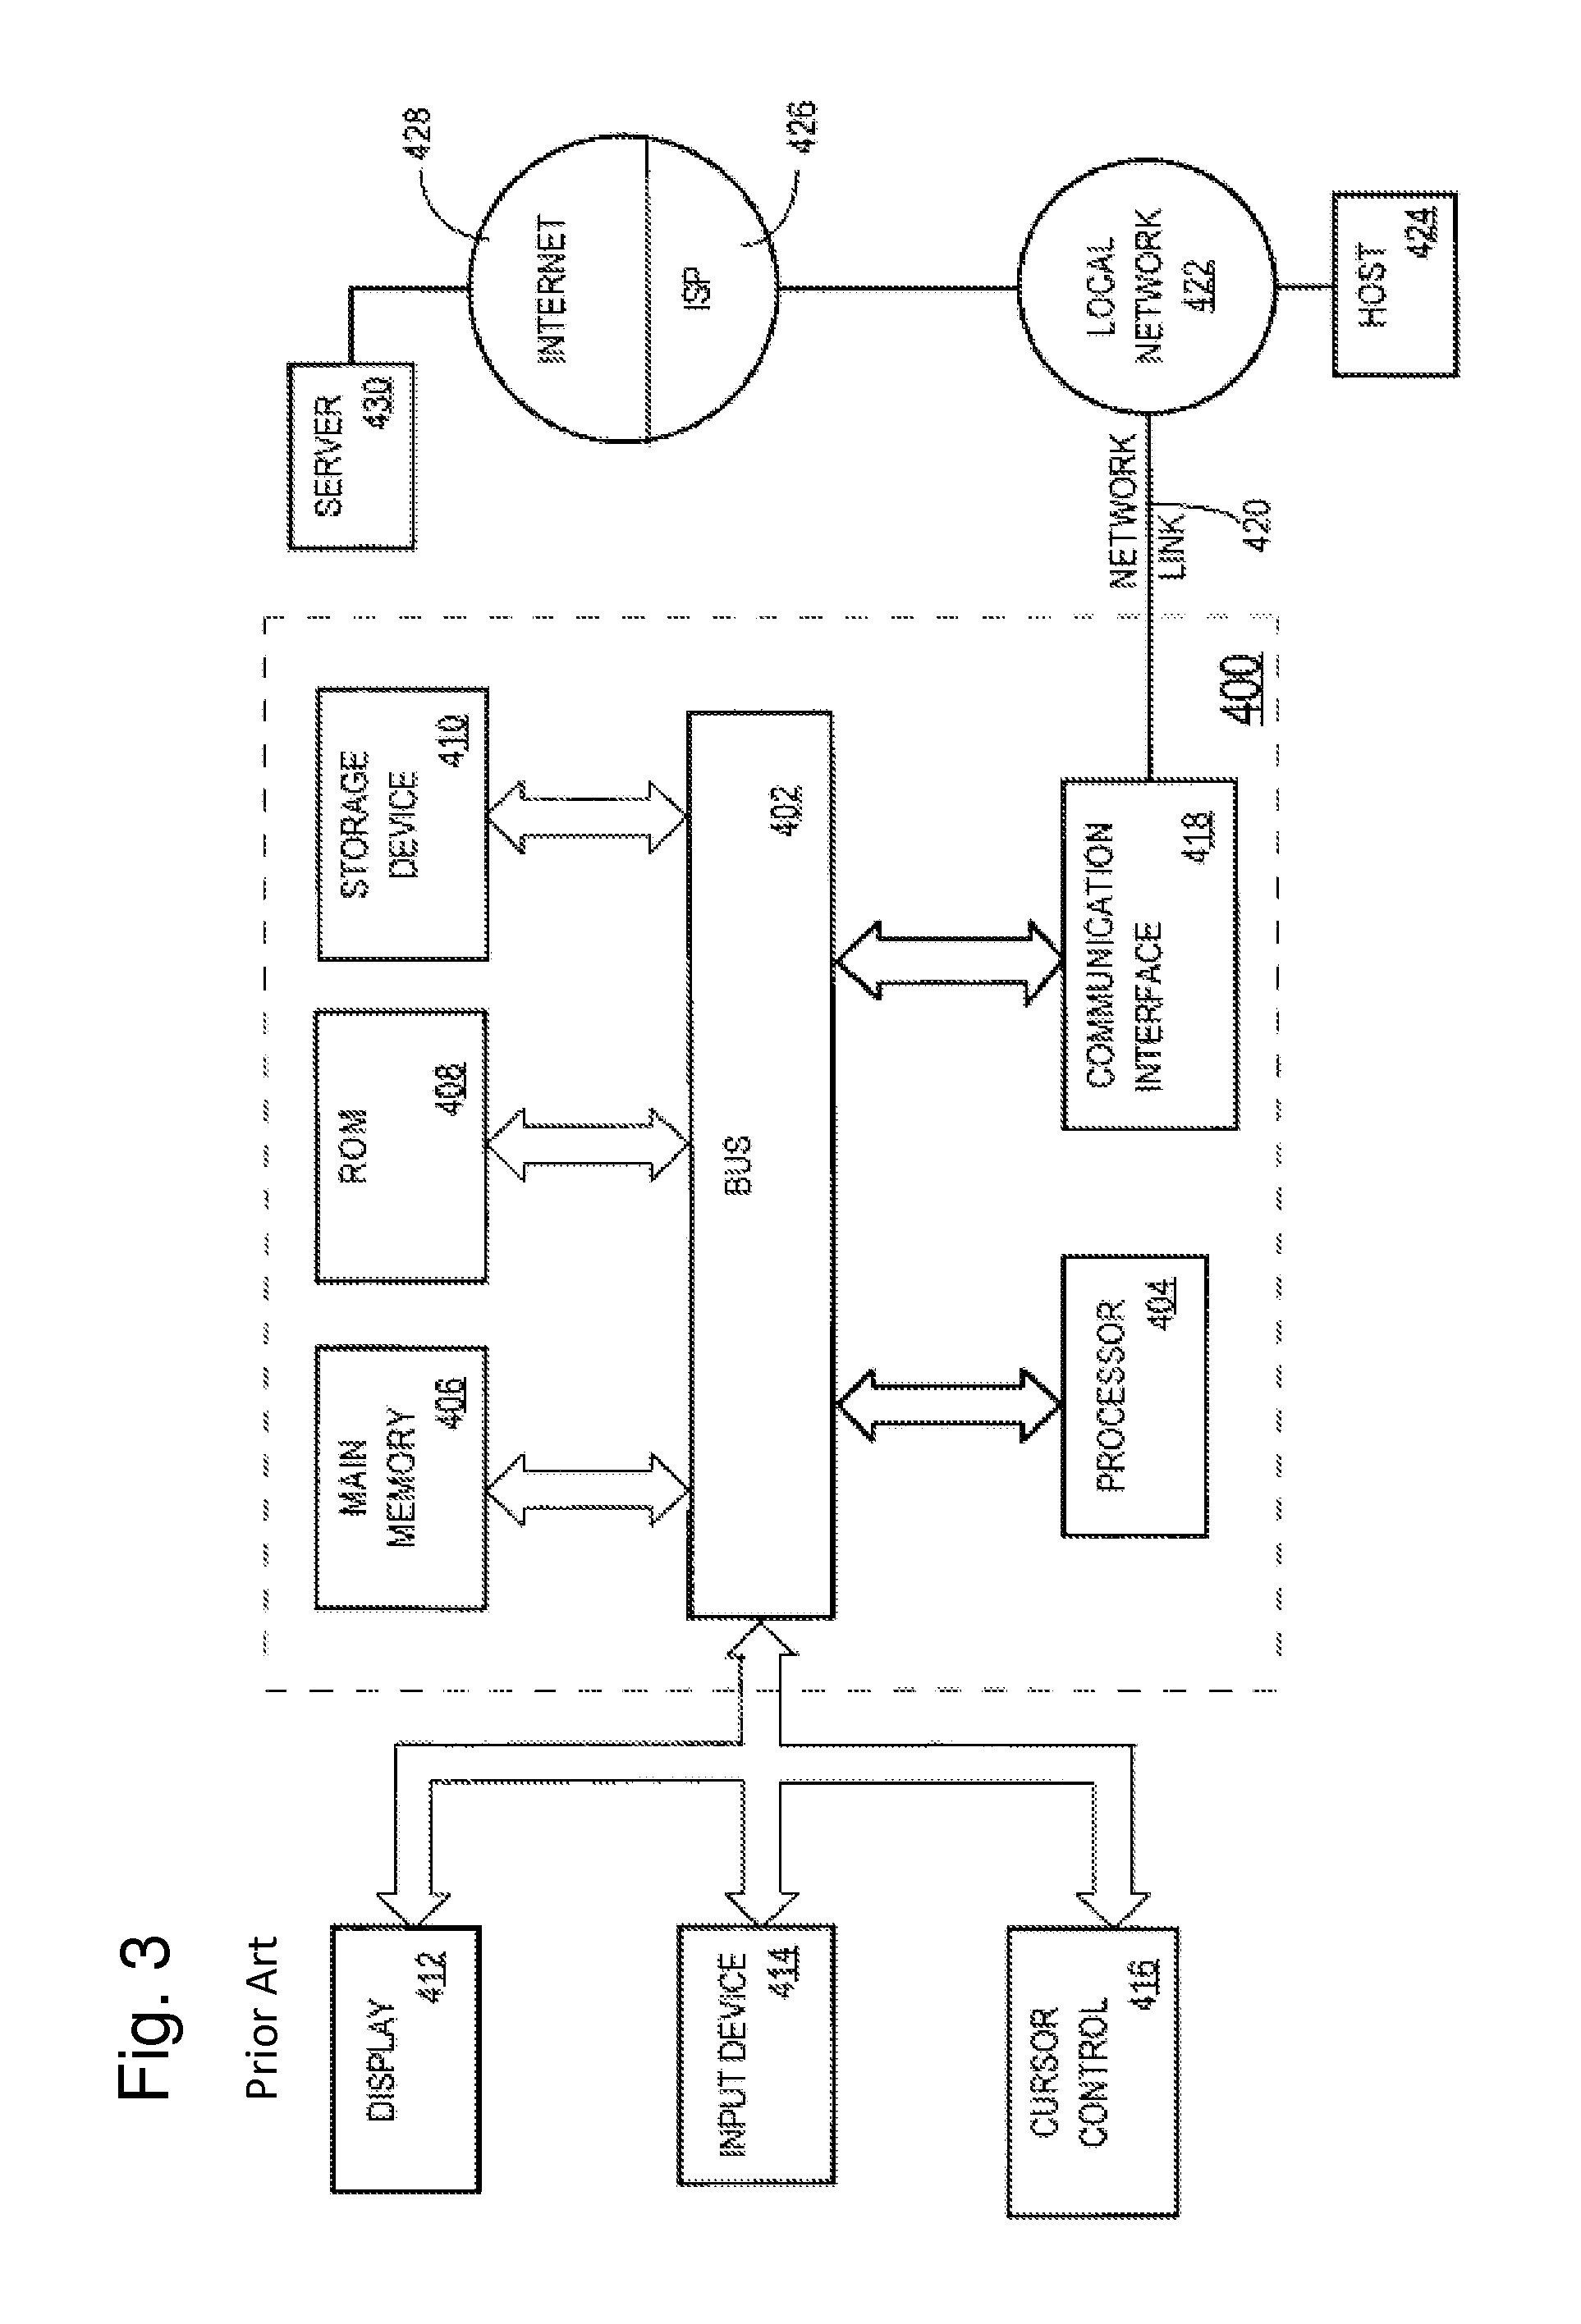 Apparatus and method for efficient estimation of the energy dissipation of processor based systems